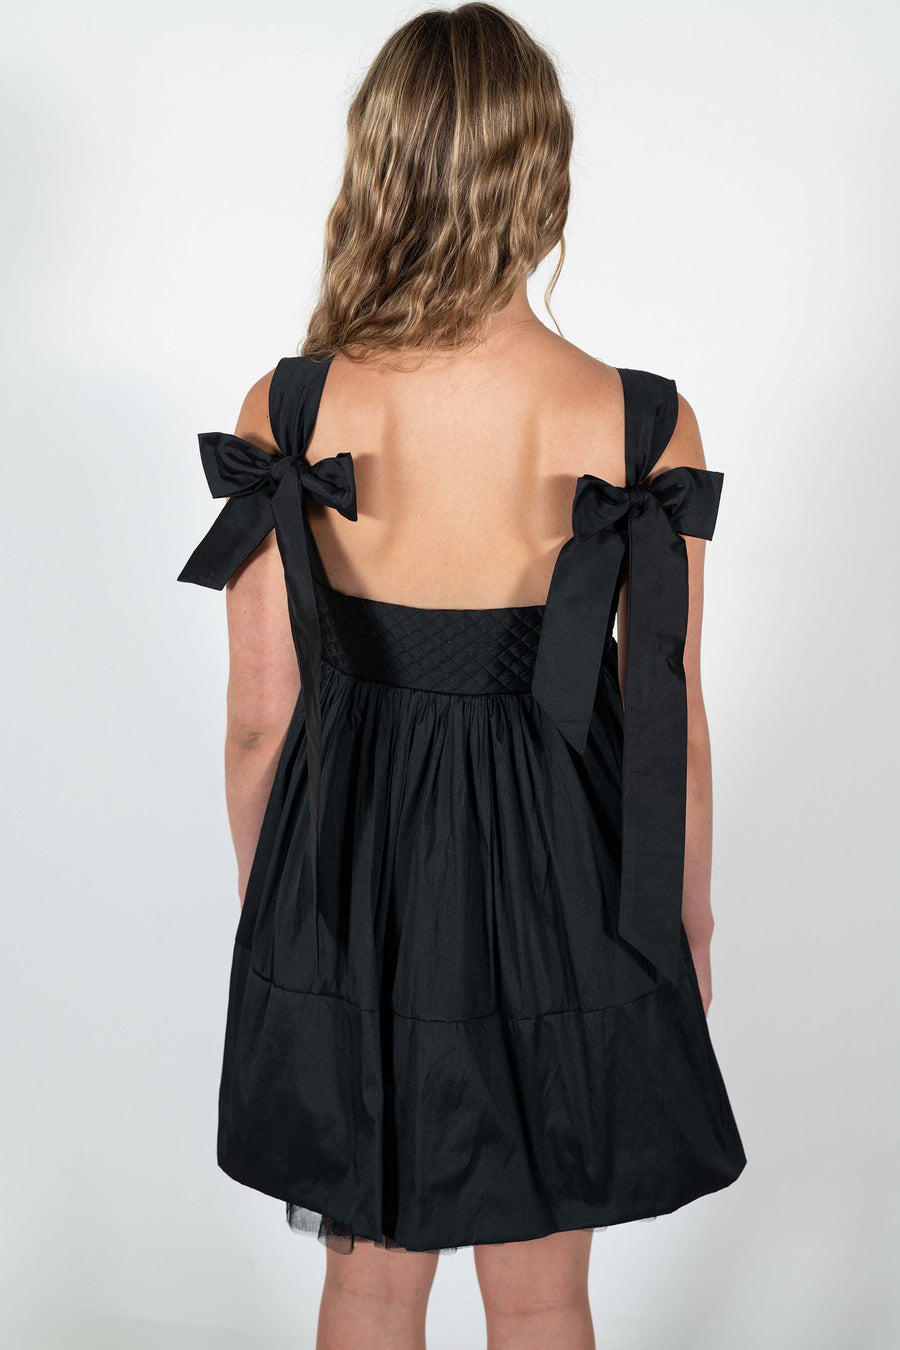 The Dolly Mini Dress with black taffeta bows and netting underskirt by House of Campbell.